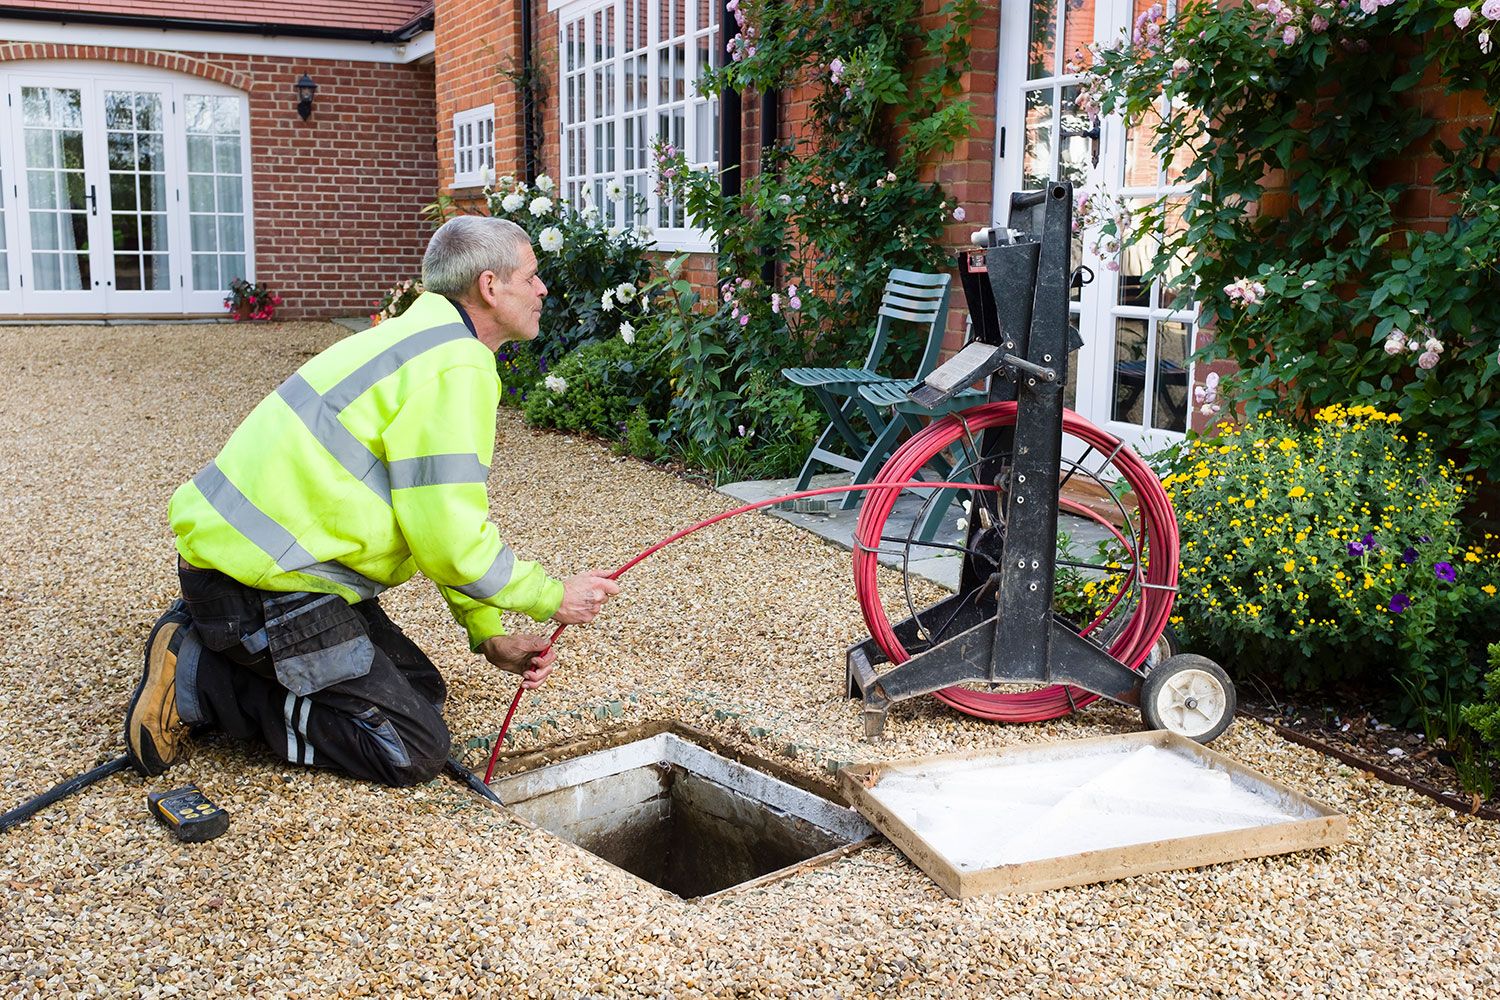 Infinity ProServ can provide drainage services including jetting and CCTV